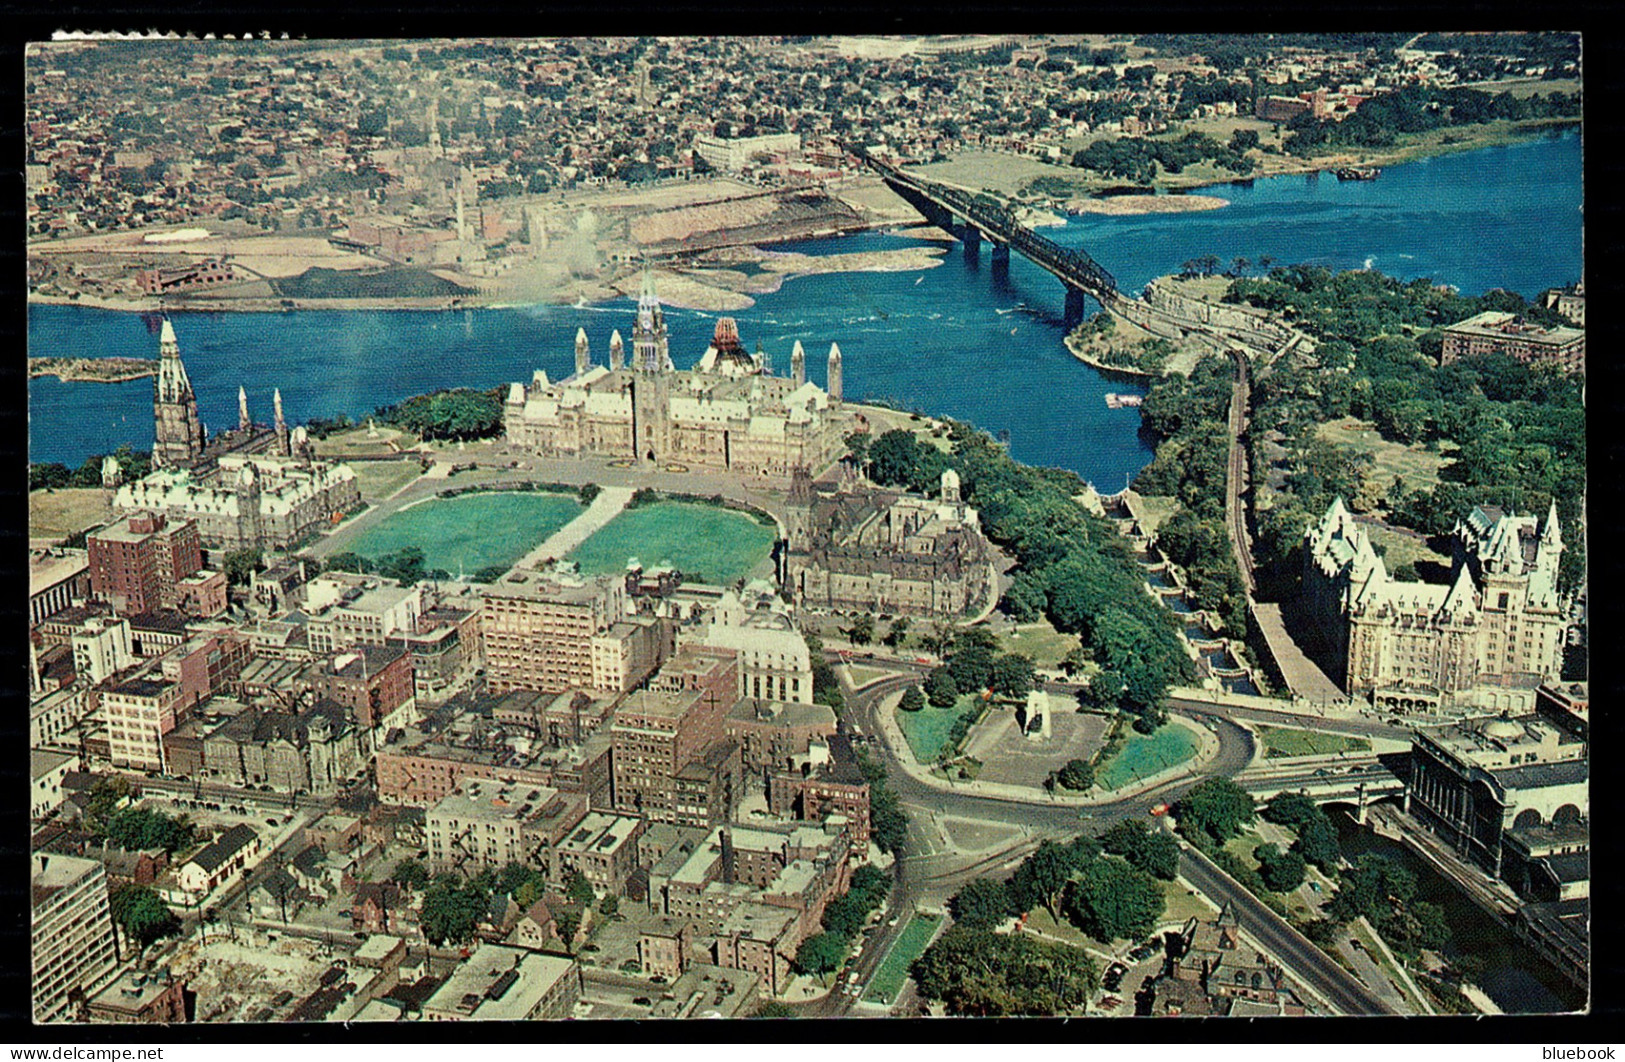 Ref 1620 - 1964 Postcard - Aerial View Of Parliament Canada - 4c Rate With Good Slogan - Covers & Documents